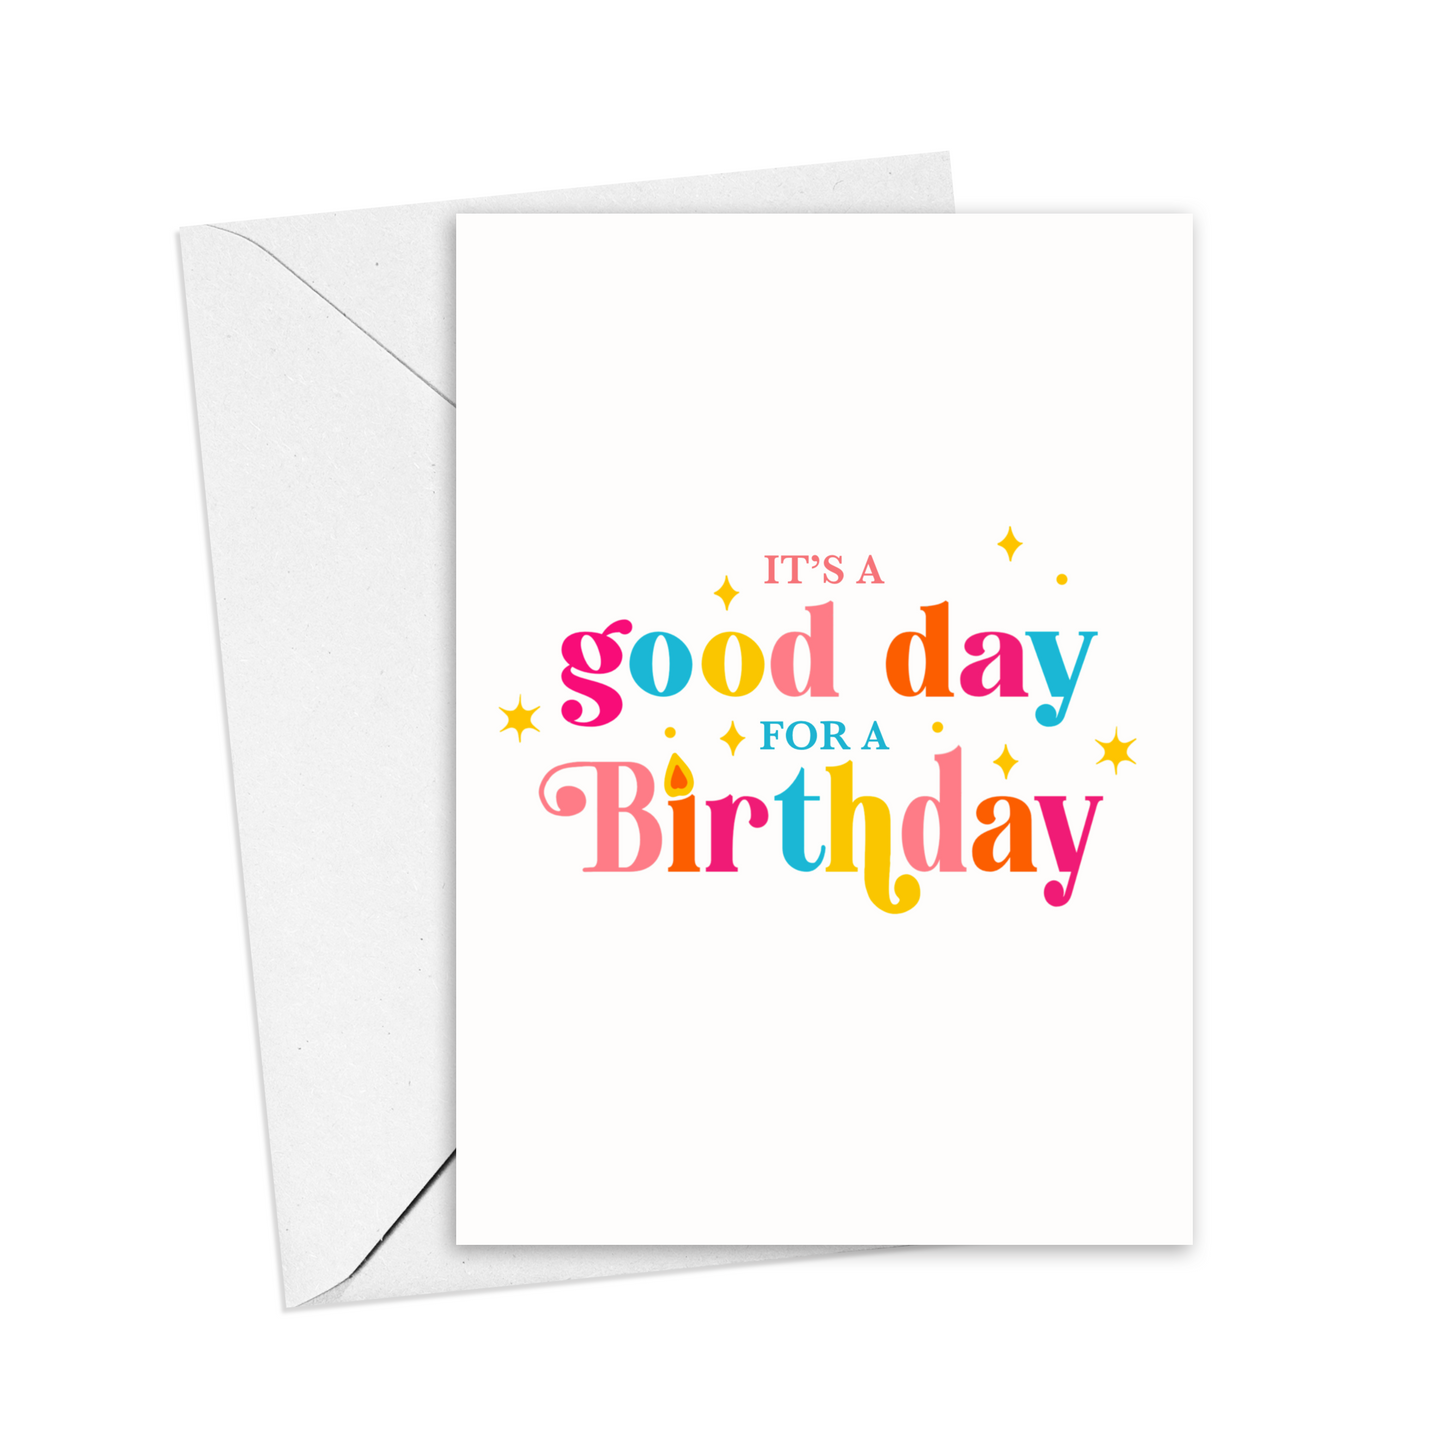 It's a Good Day for a Birthday Greetings Card